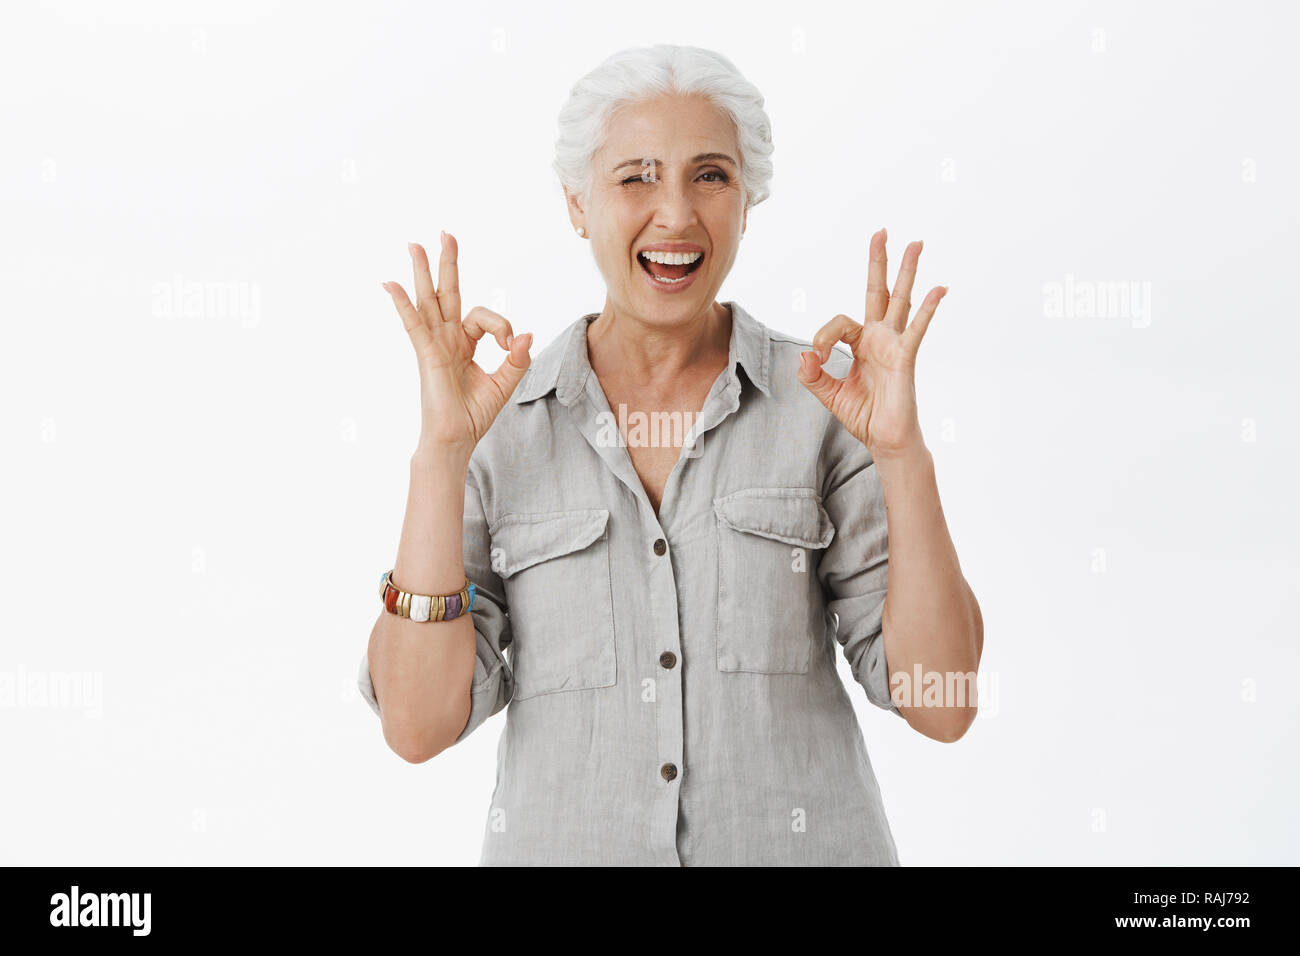 Waist-up shot of charismatic happy and cute awesome granny winking joyfully smiling and showing okay gestures confirming she dealt with everything and we not have worry over gray background Stock Photo